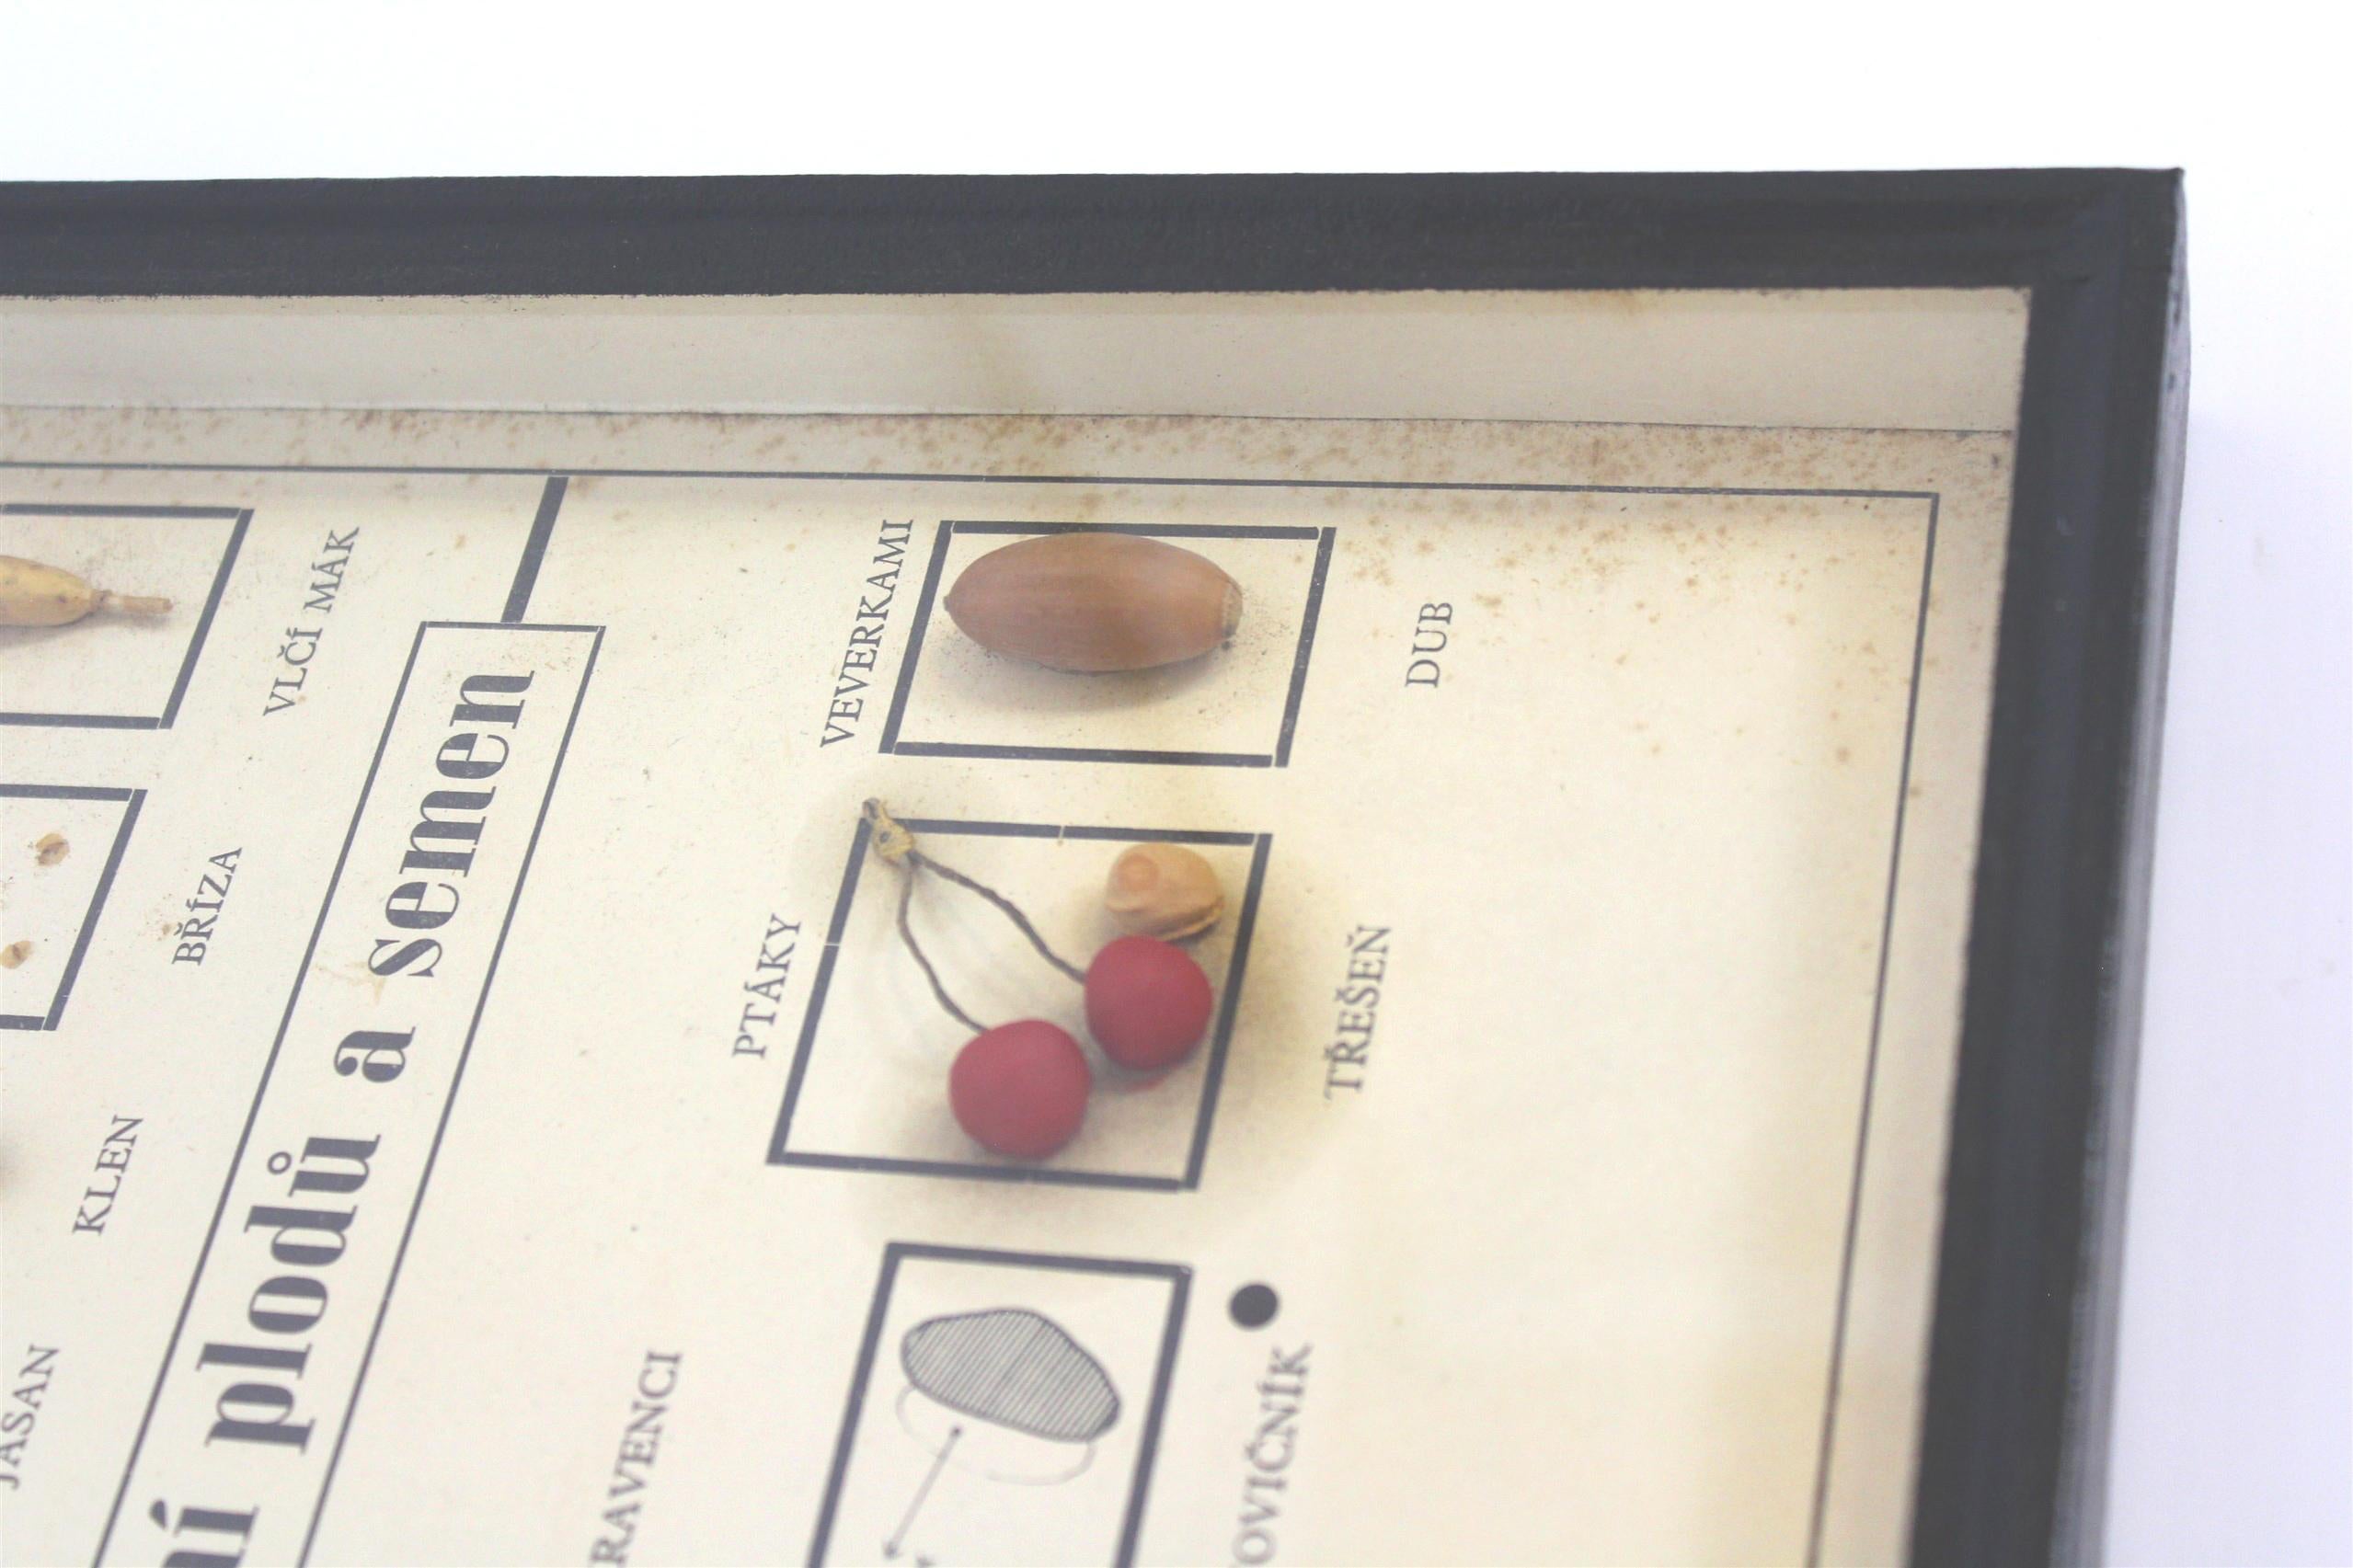 A school chart in a frame shows how seeds and fruits are spread (by plants, wind, water, animals). There are real fruits and seeds stuck inside. Czechoslovakia, 1960s.
  